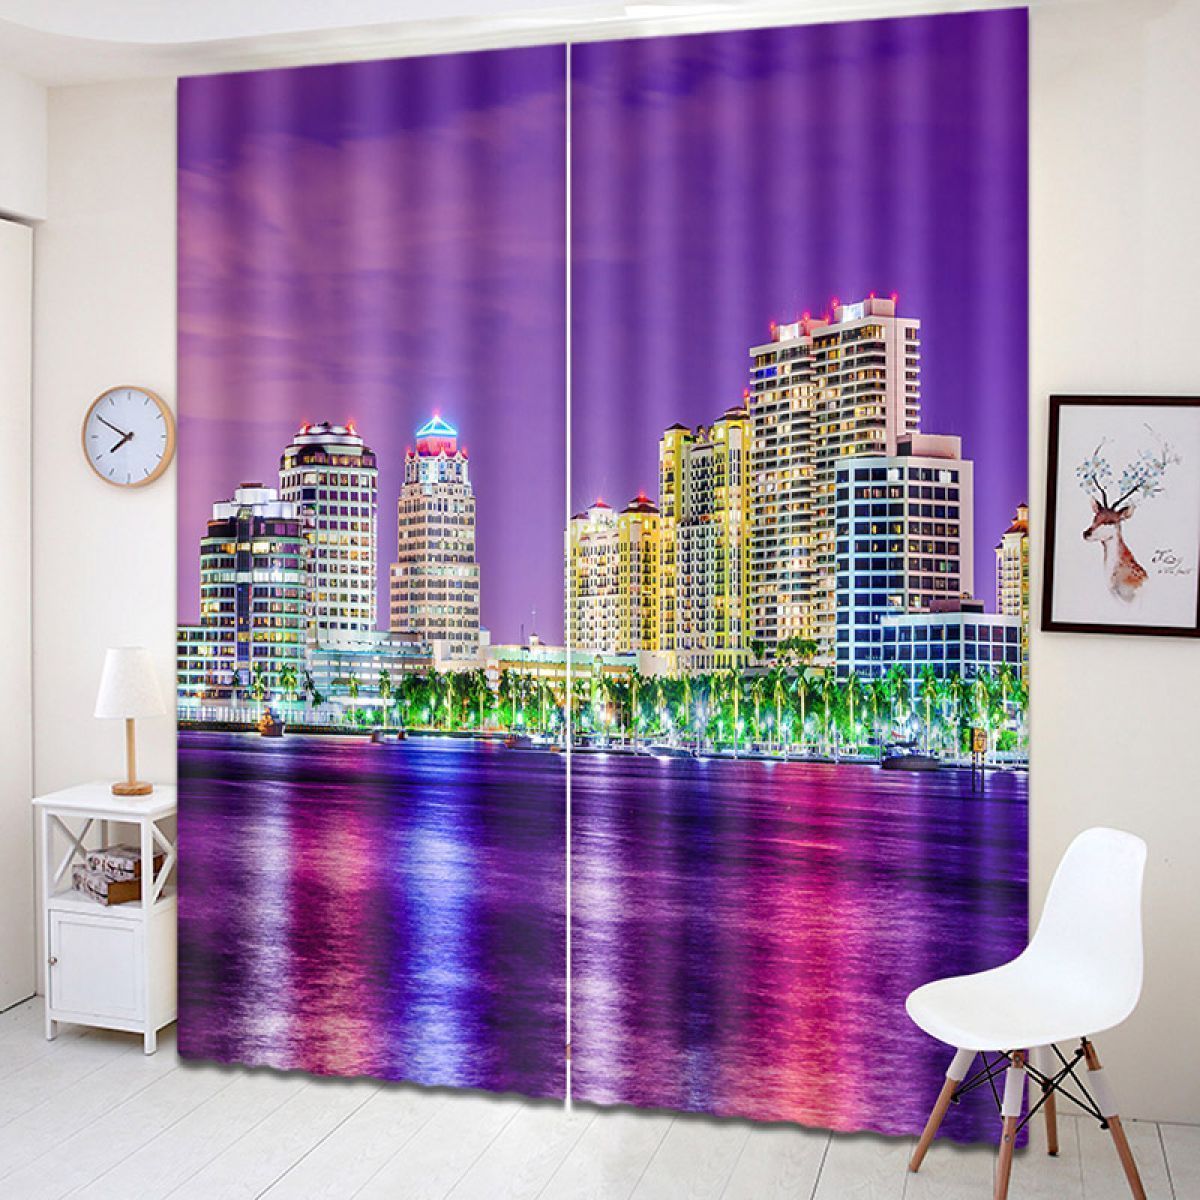 City And River At Night Printed Window Curtain Home Decor